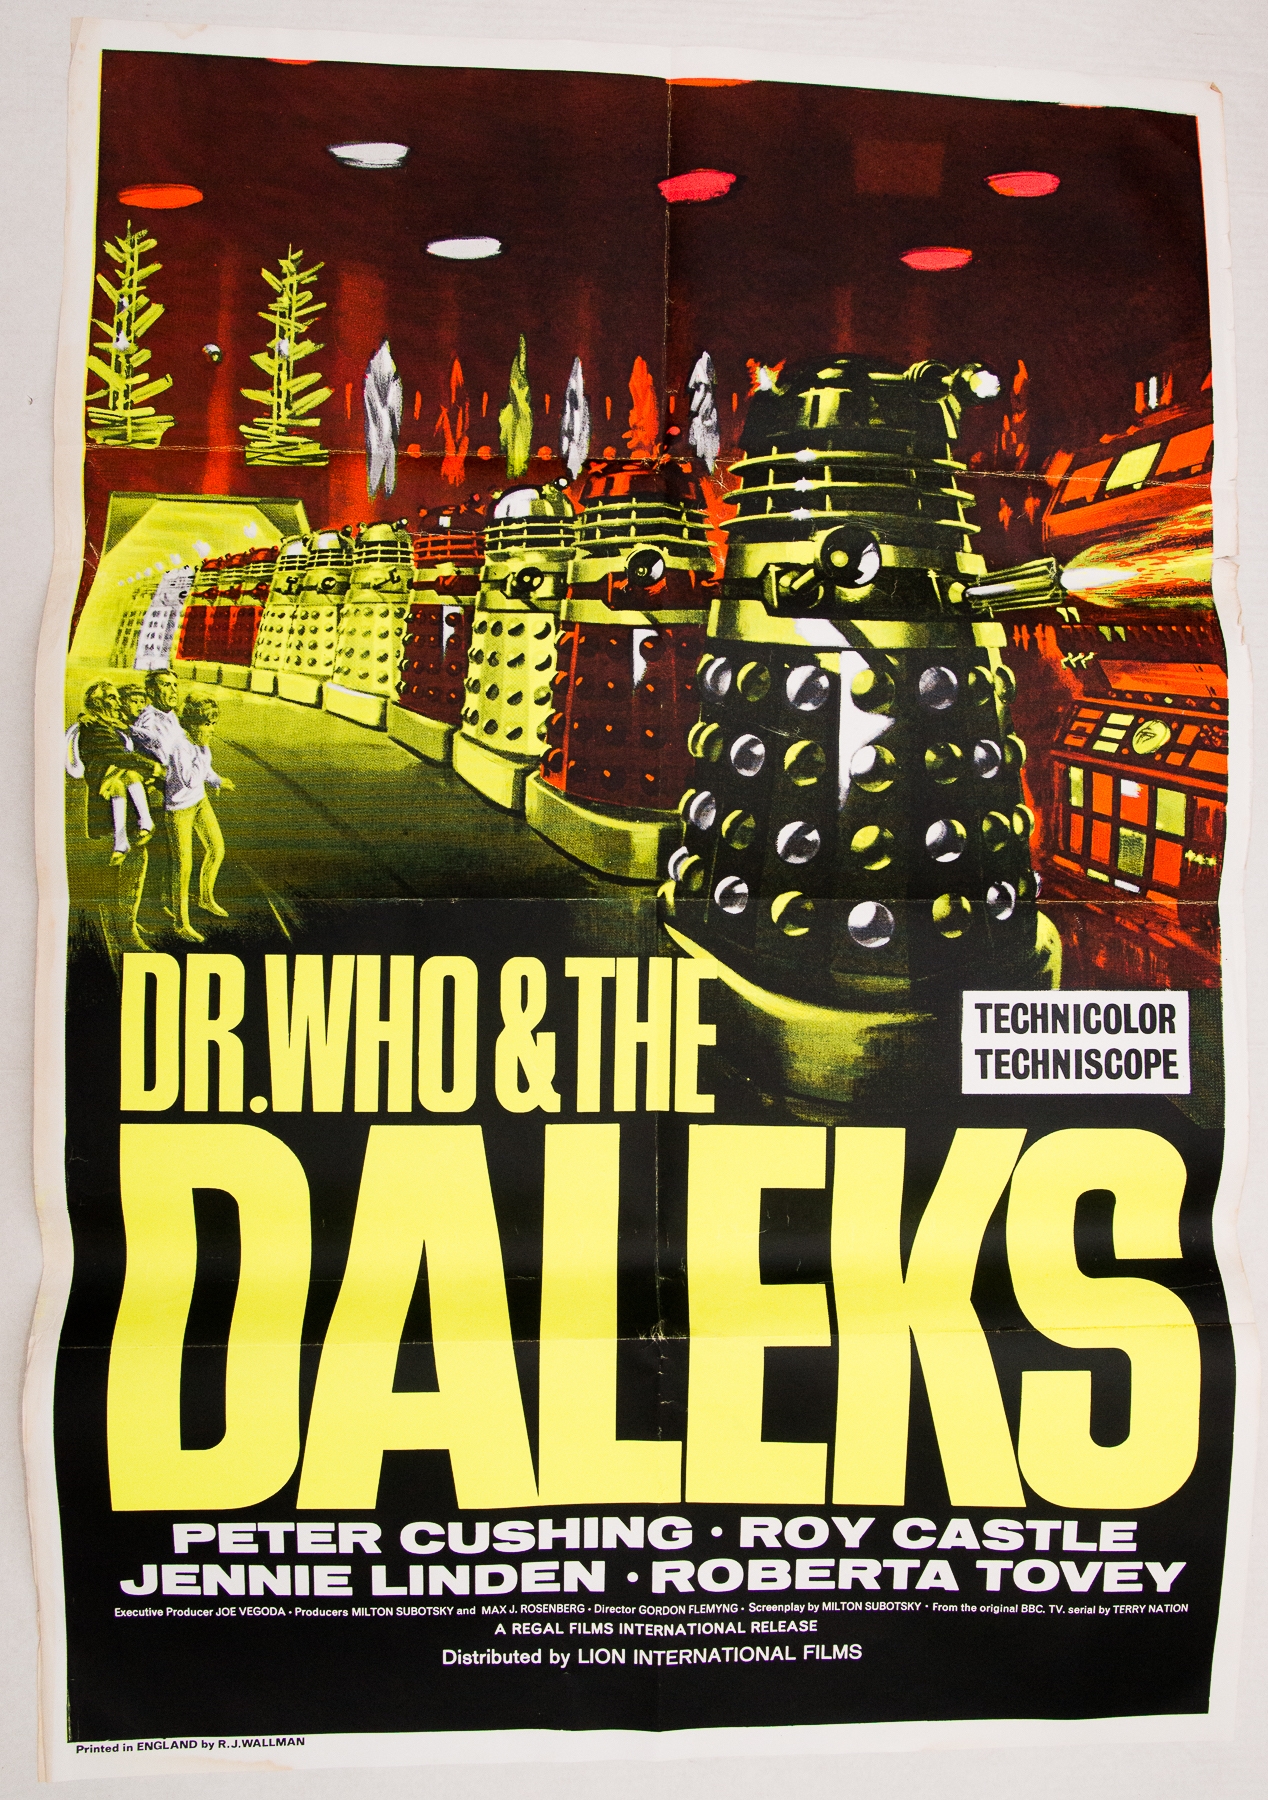 DR. WHO AND THE DALEKS (1965) - Later release - British One Sheet Film Poster (27” x 40” – 68.5 x